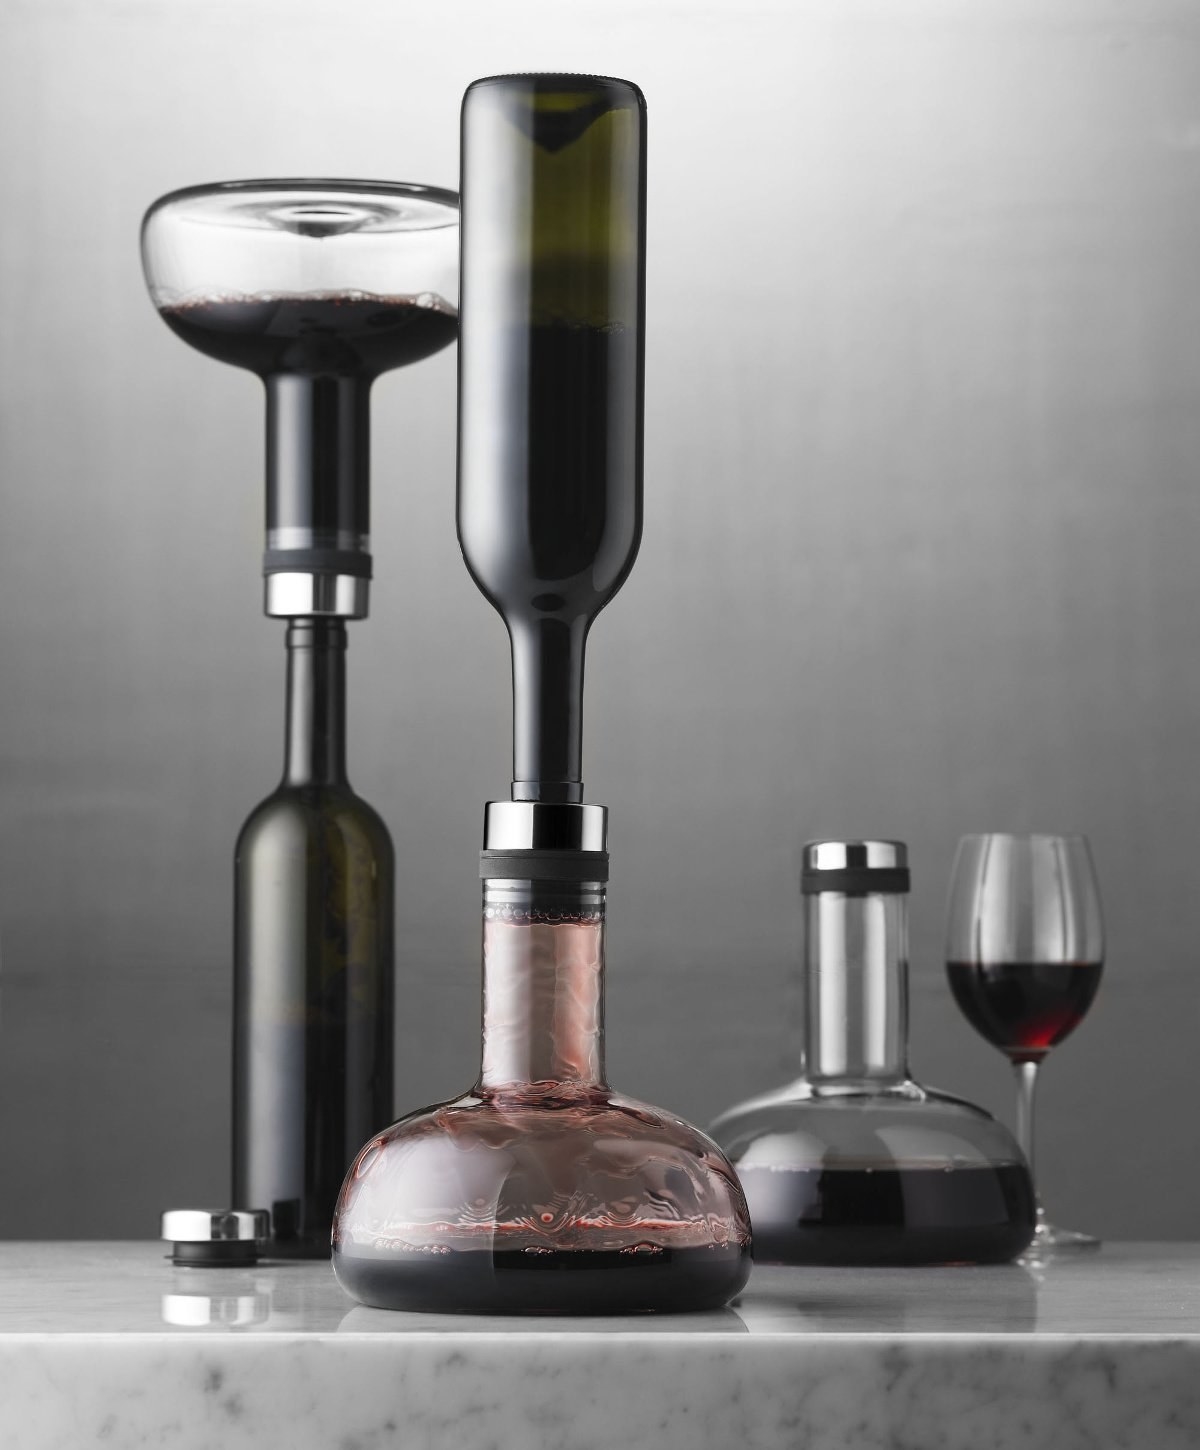 Wine decanter and glasses on display, showcasing their sleek design for potential buyers